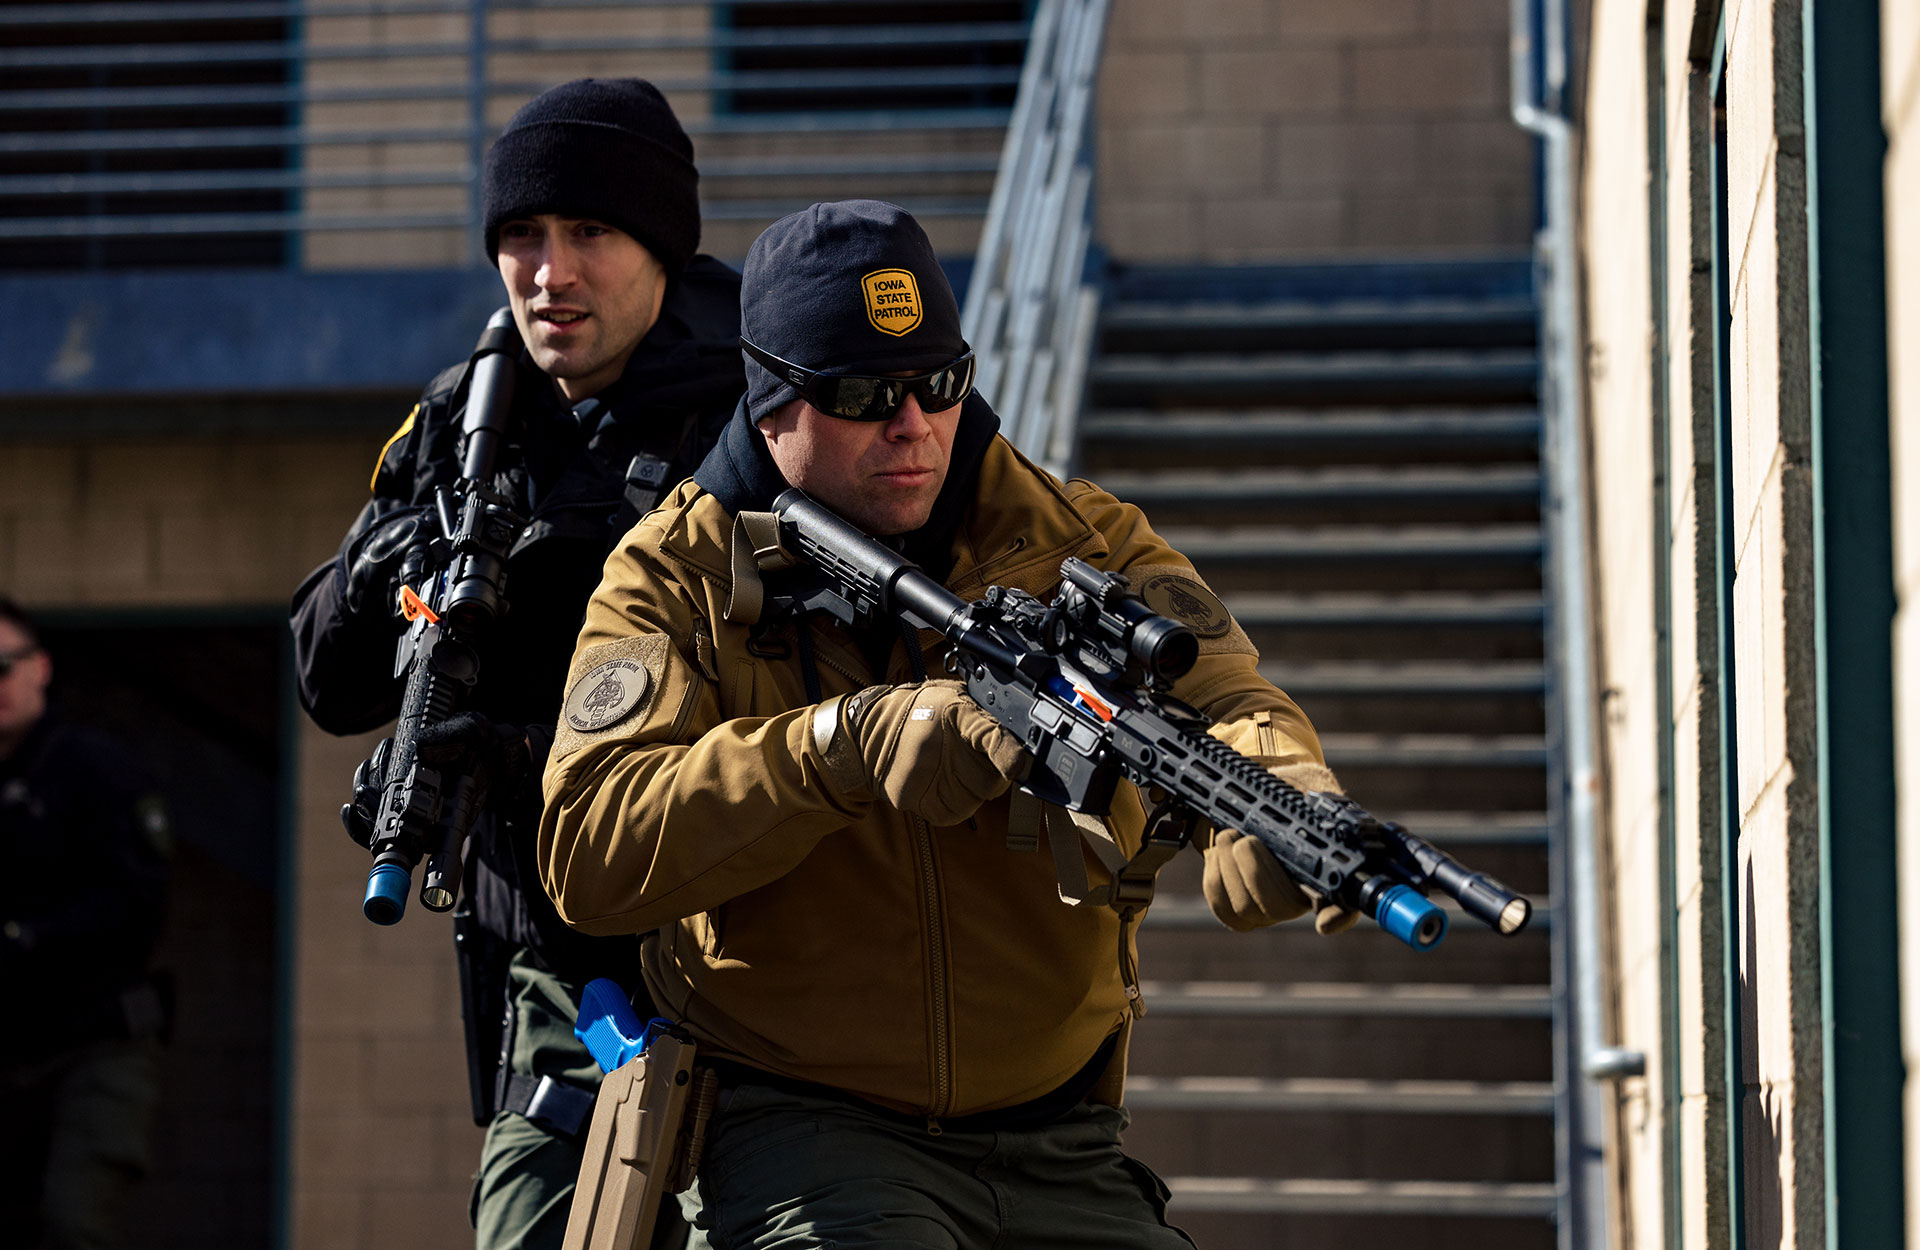 New tactics, training aim for greater SWAT team safety